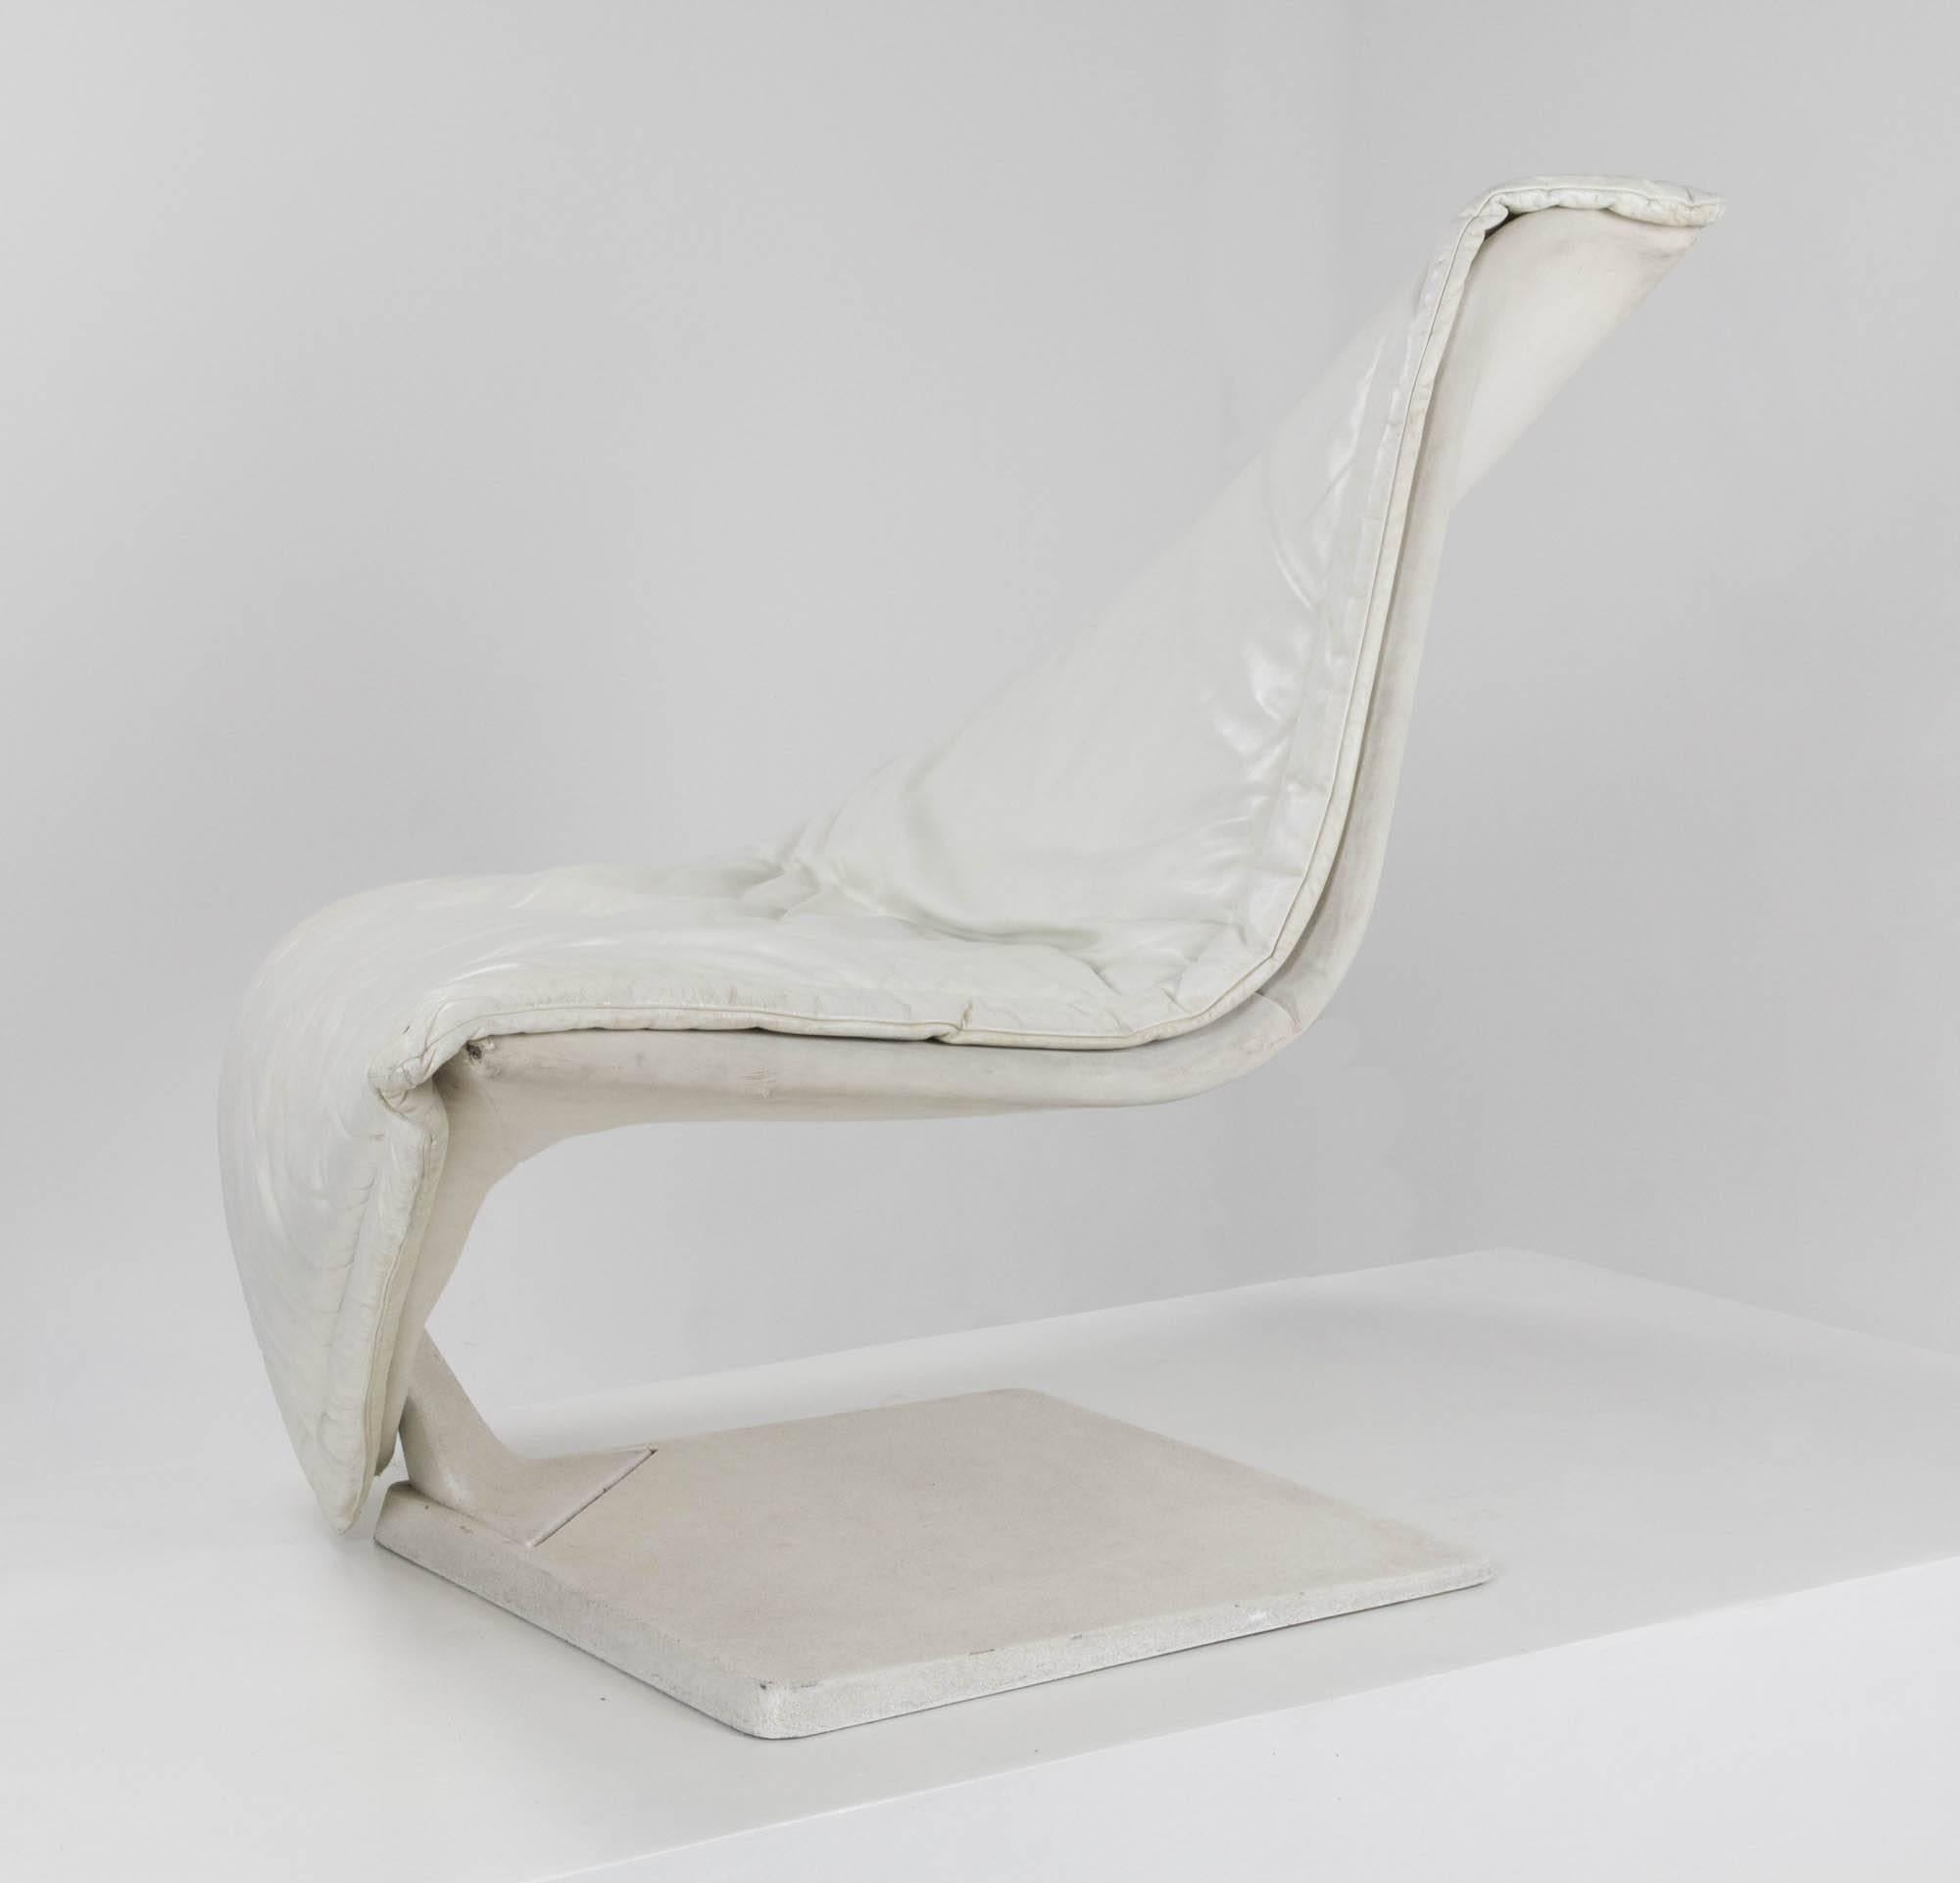 Flying carpet lounge chair by Simon Desanta for Rosenthal Einrichtung with white leather upholstery formed around matte lacquered white frame.